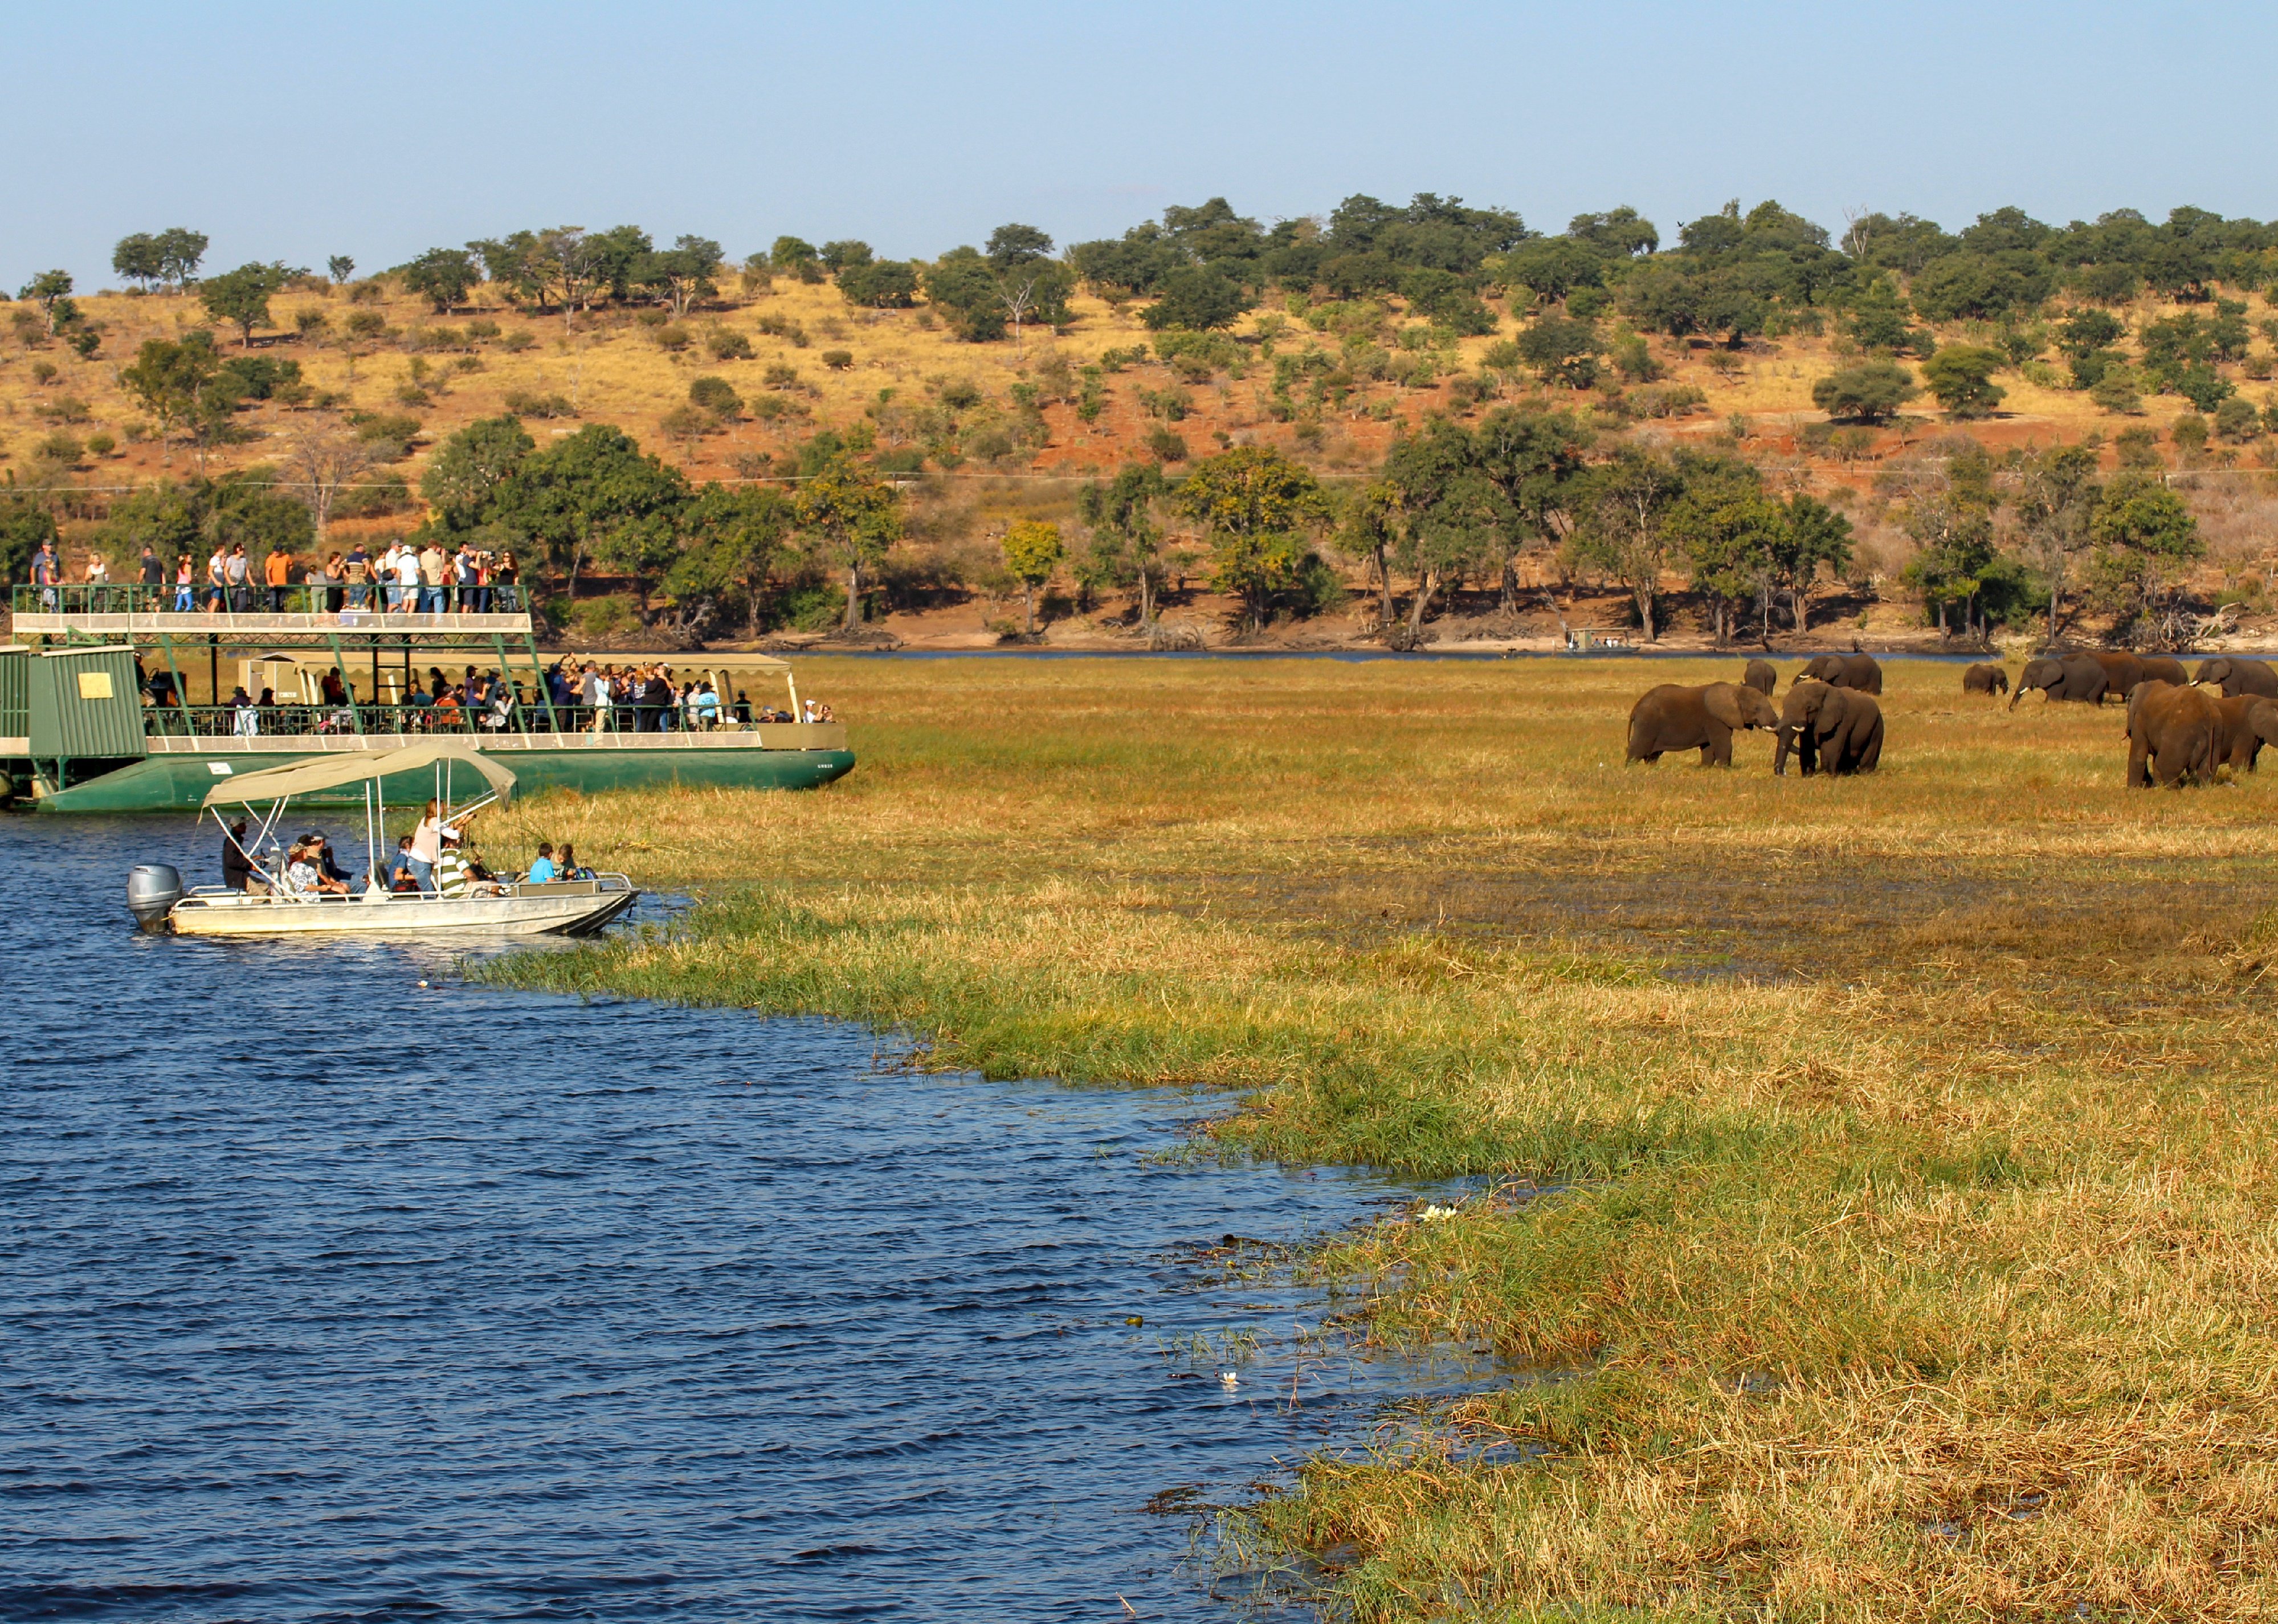 Small and large boat with people on Chobe River watching elephants eat grass.